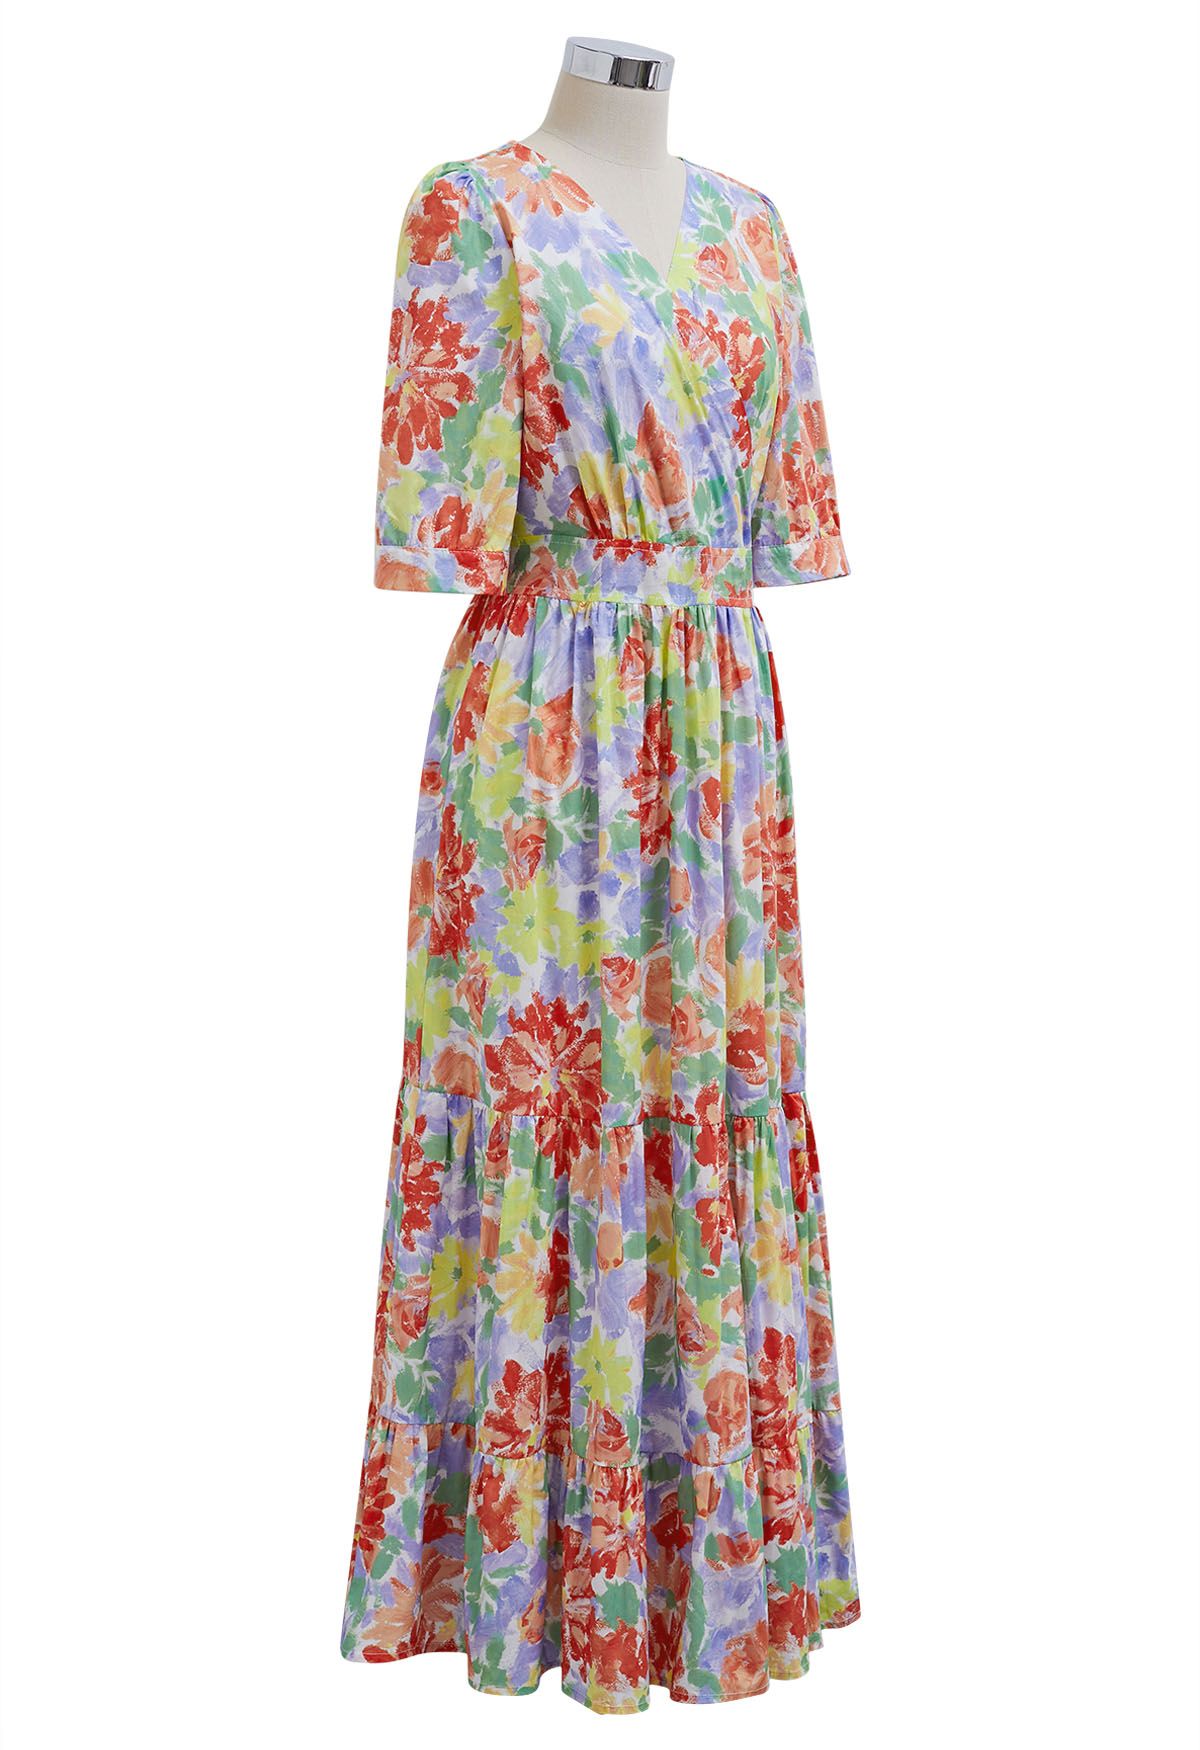 Summer Shine Floral Printed Frilling Wrapped Dress